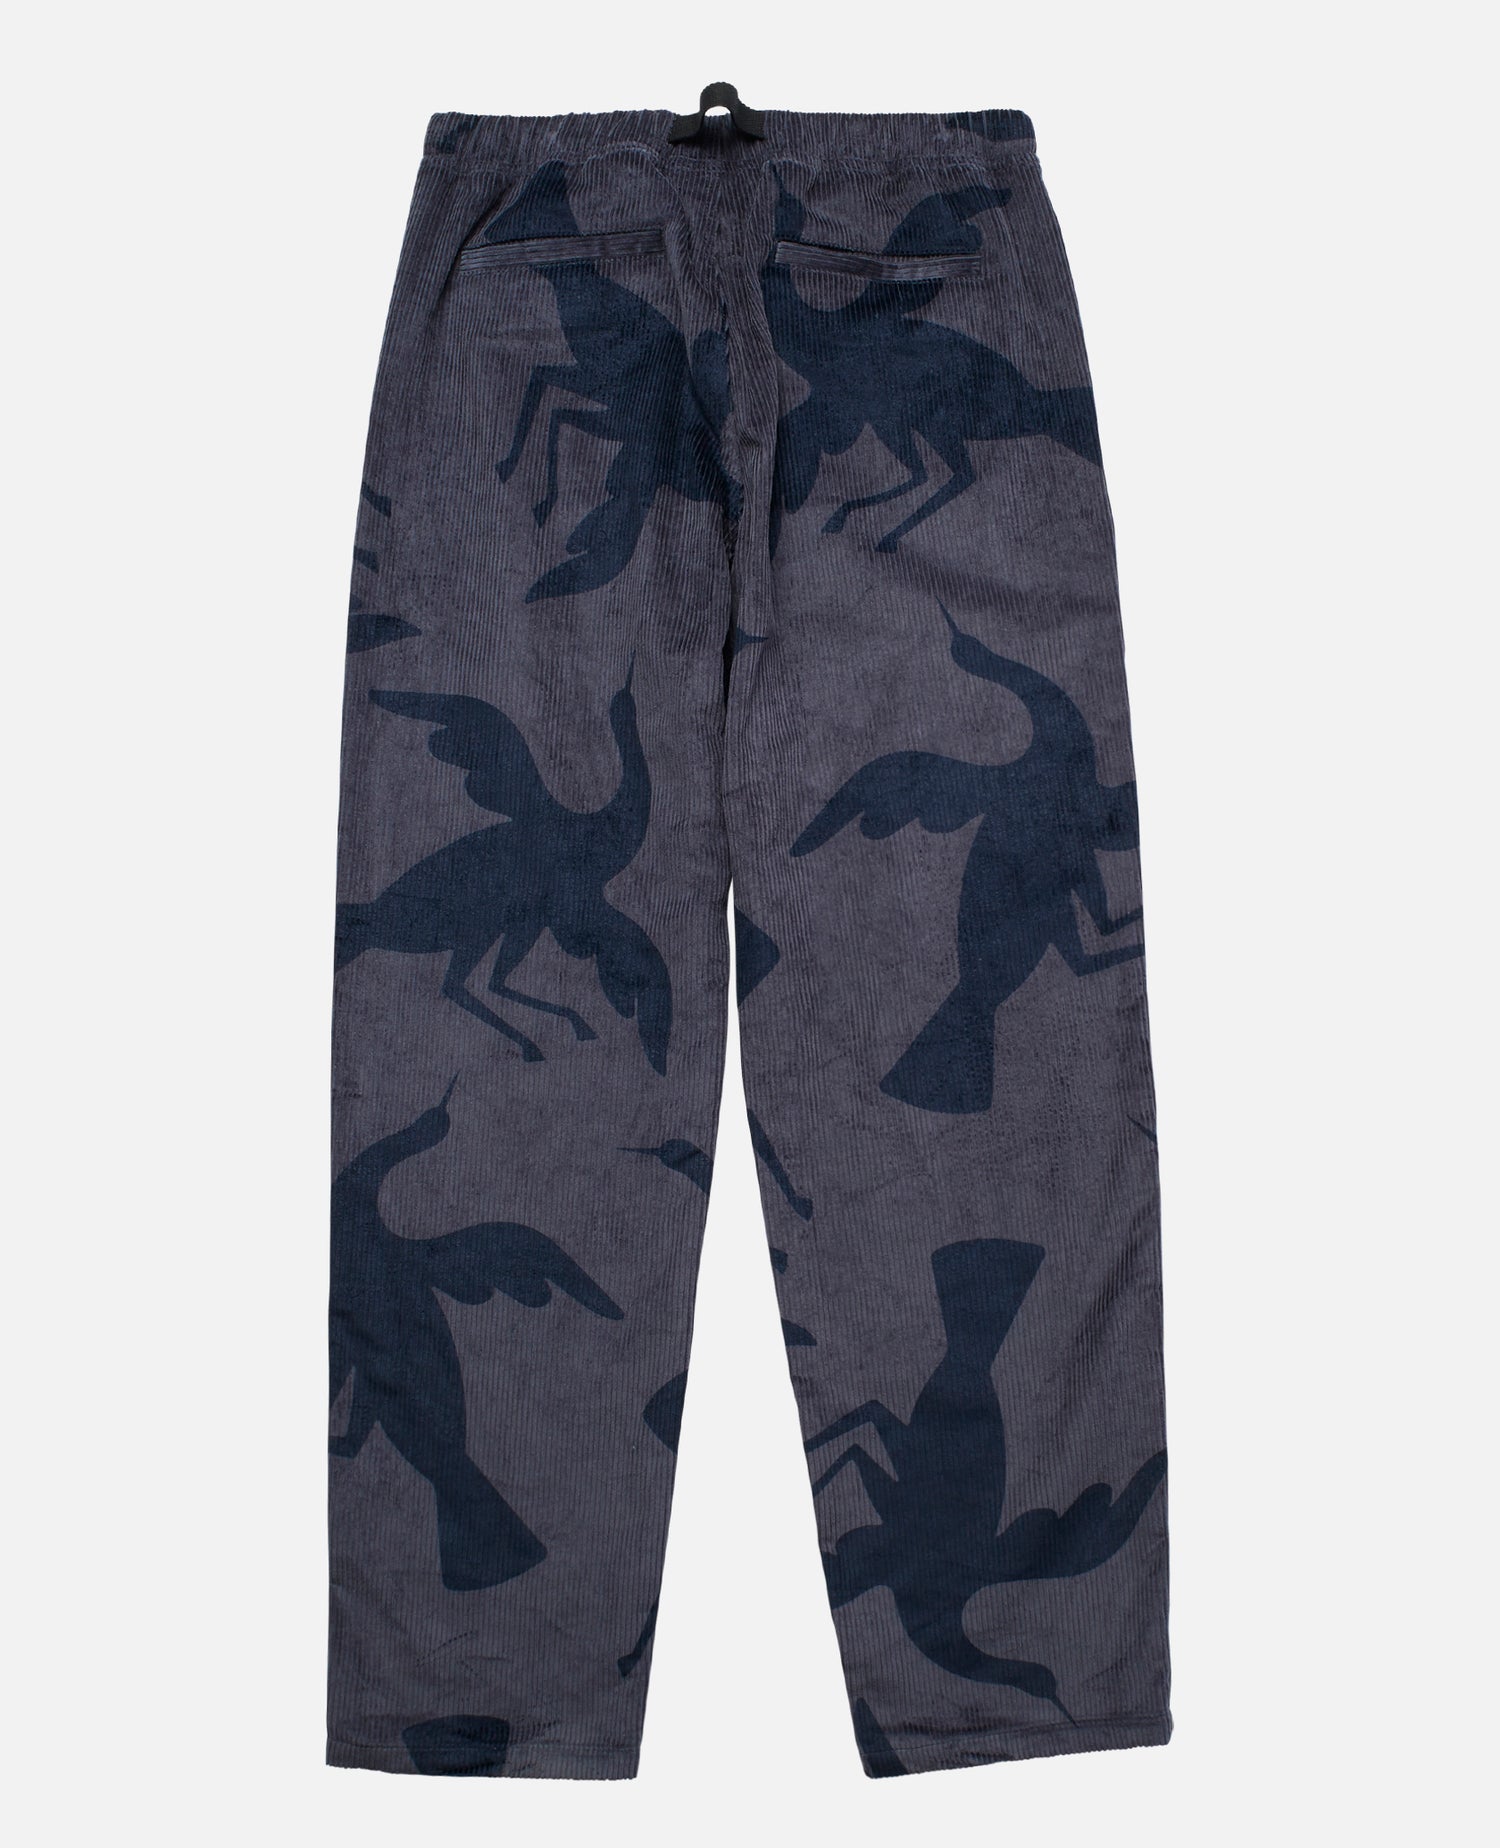 by Parra Clipped Wings Corduroy Pants (Greyish Blue)